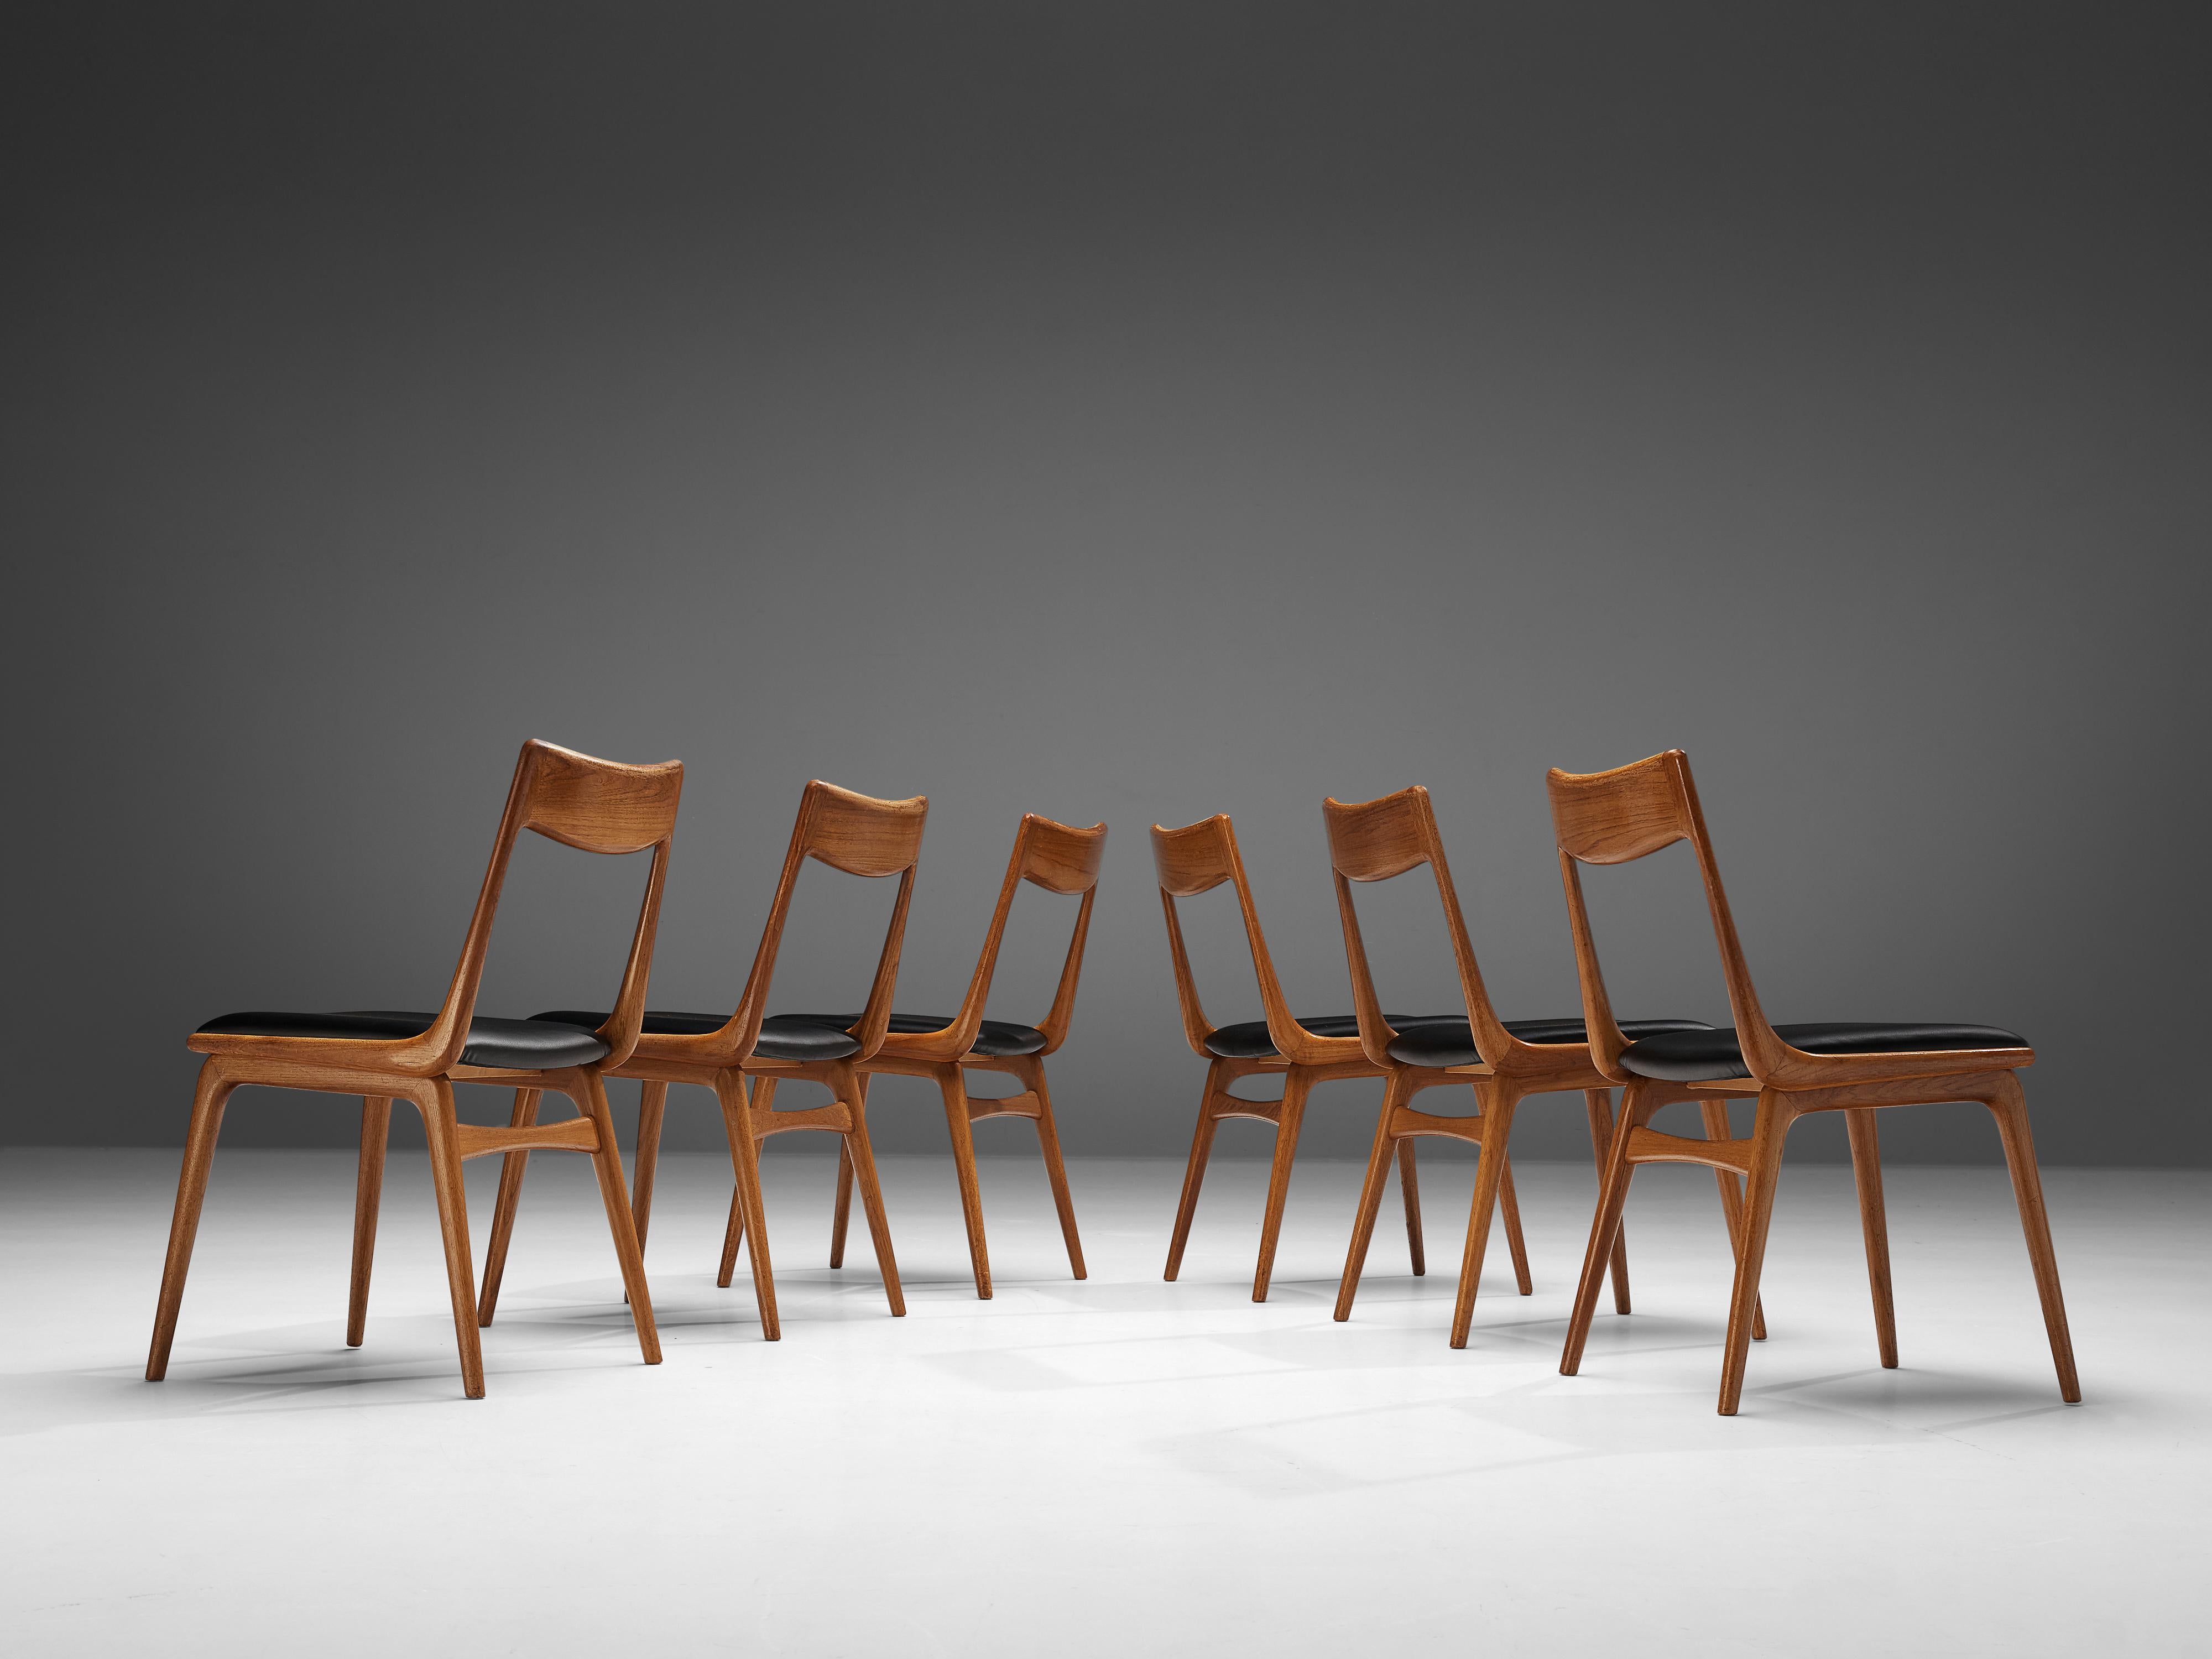 Alfred Christiansen for Slagelse Mobelvaerk, set of six 'Boomerang' dining chairs, teak, leather, Denmark, 1950s.

Set of six dining chairs with elegant legs and back. On the sides of the seat there is a boomerang shaped wood construction that